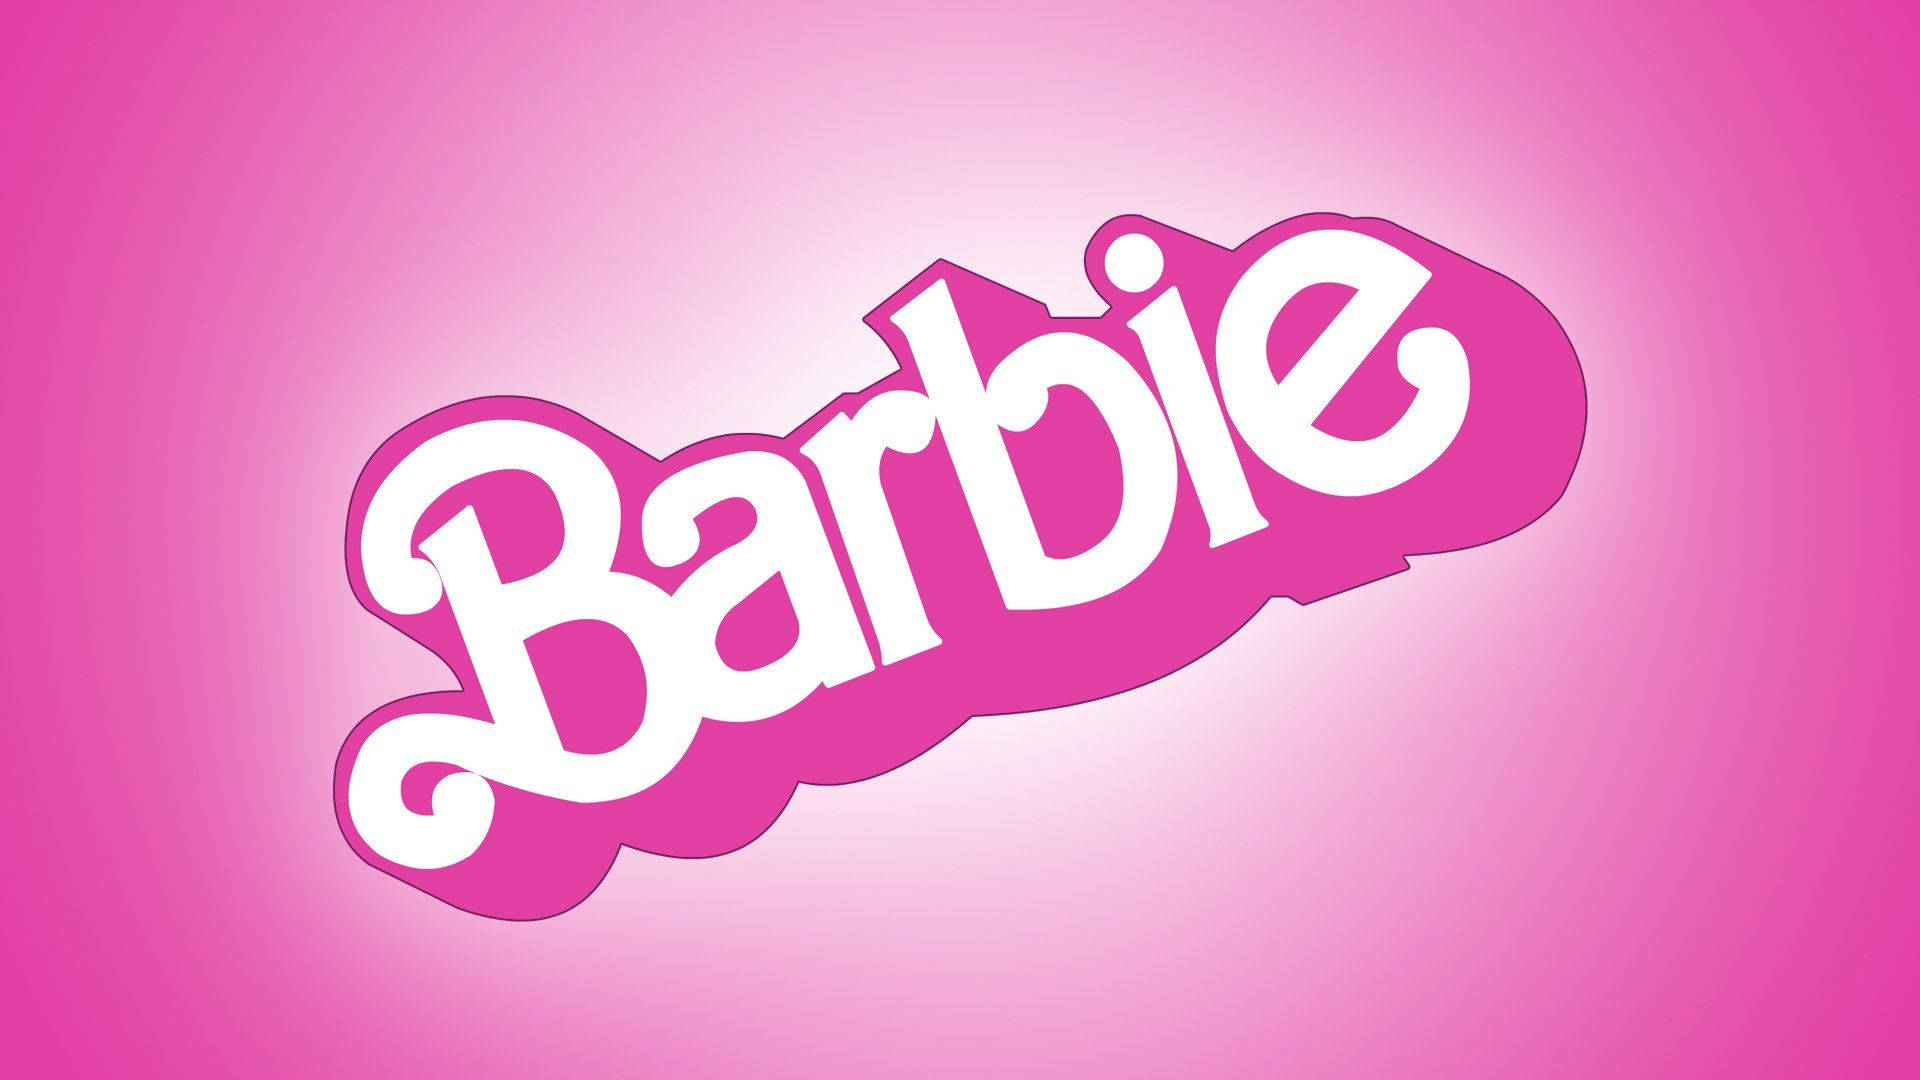 Barbie Brand In Pink